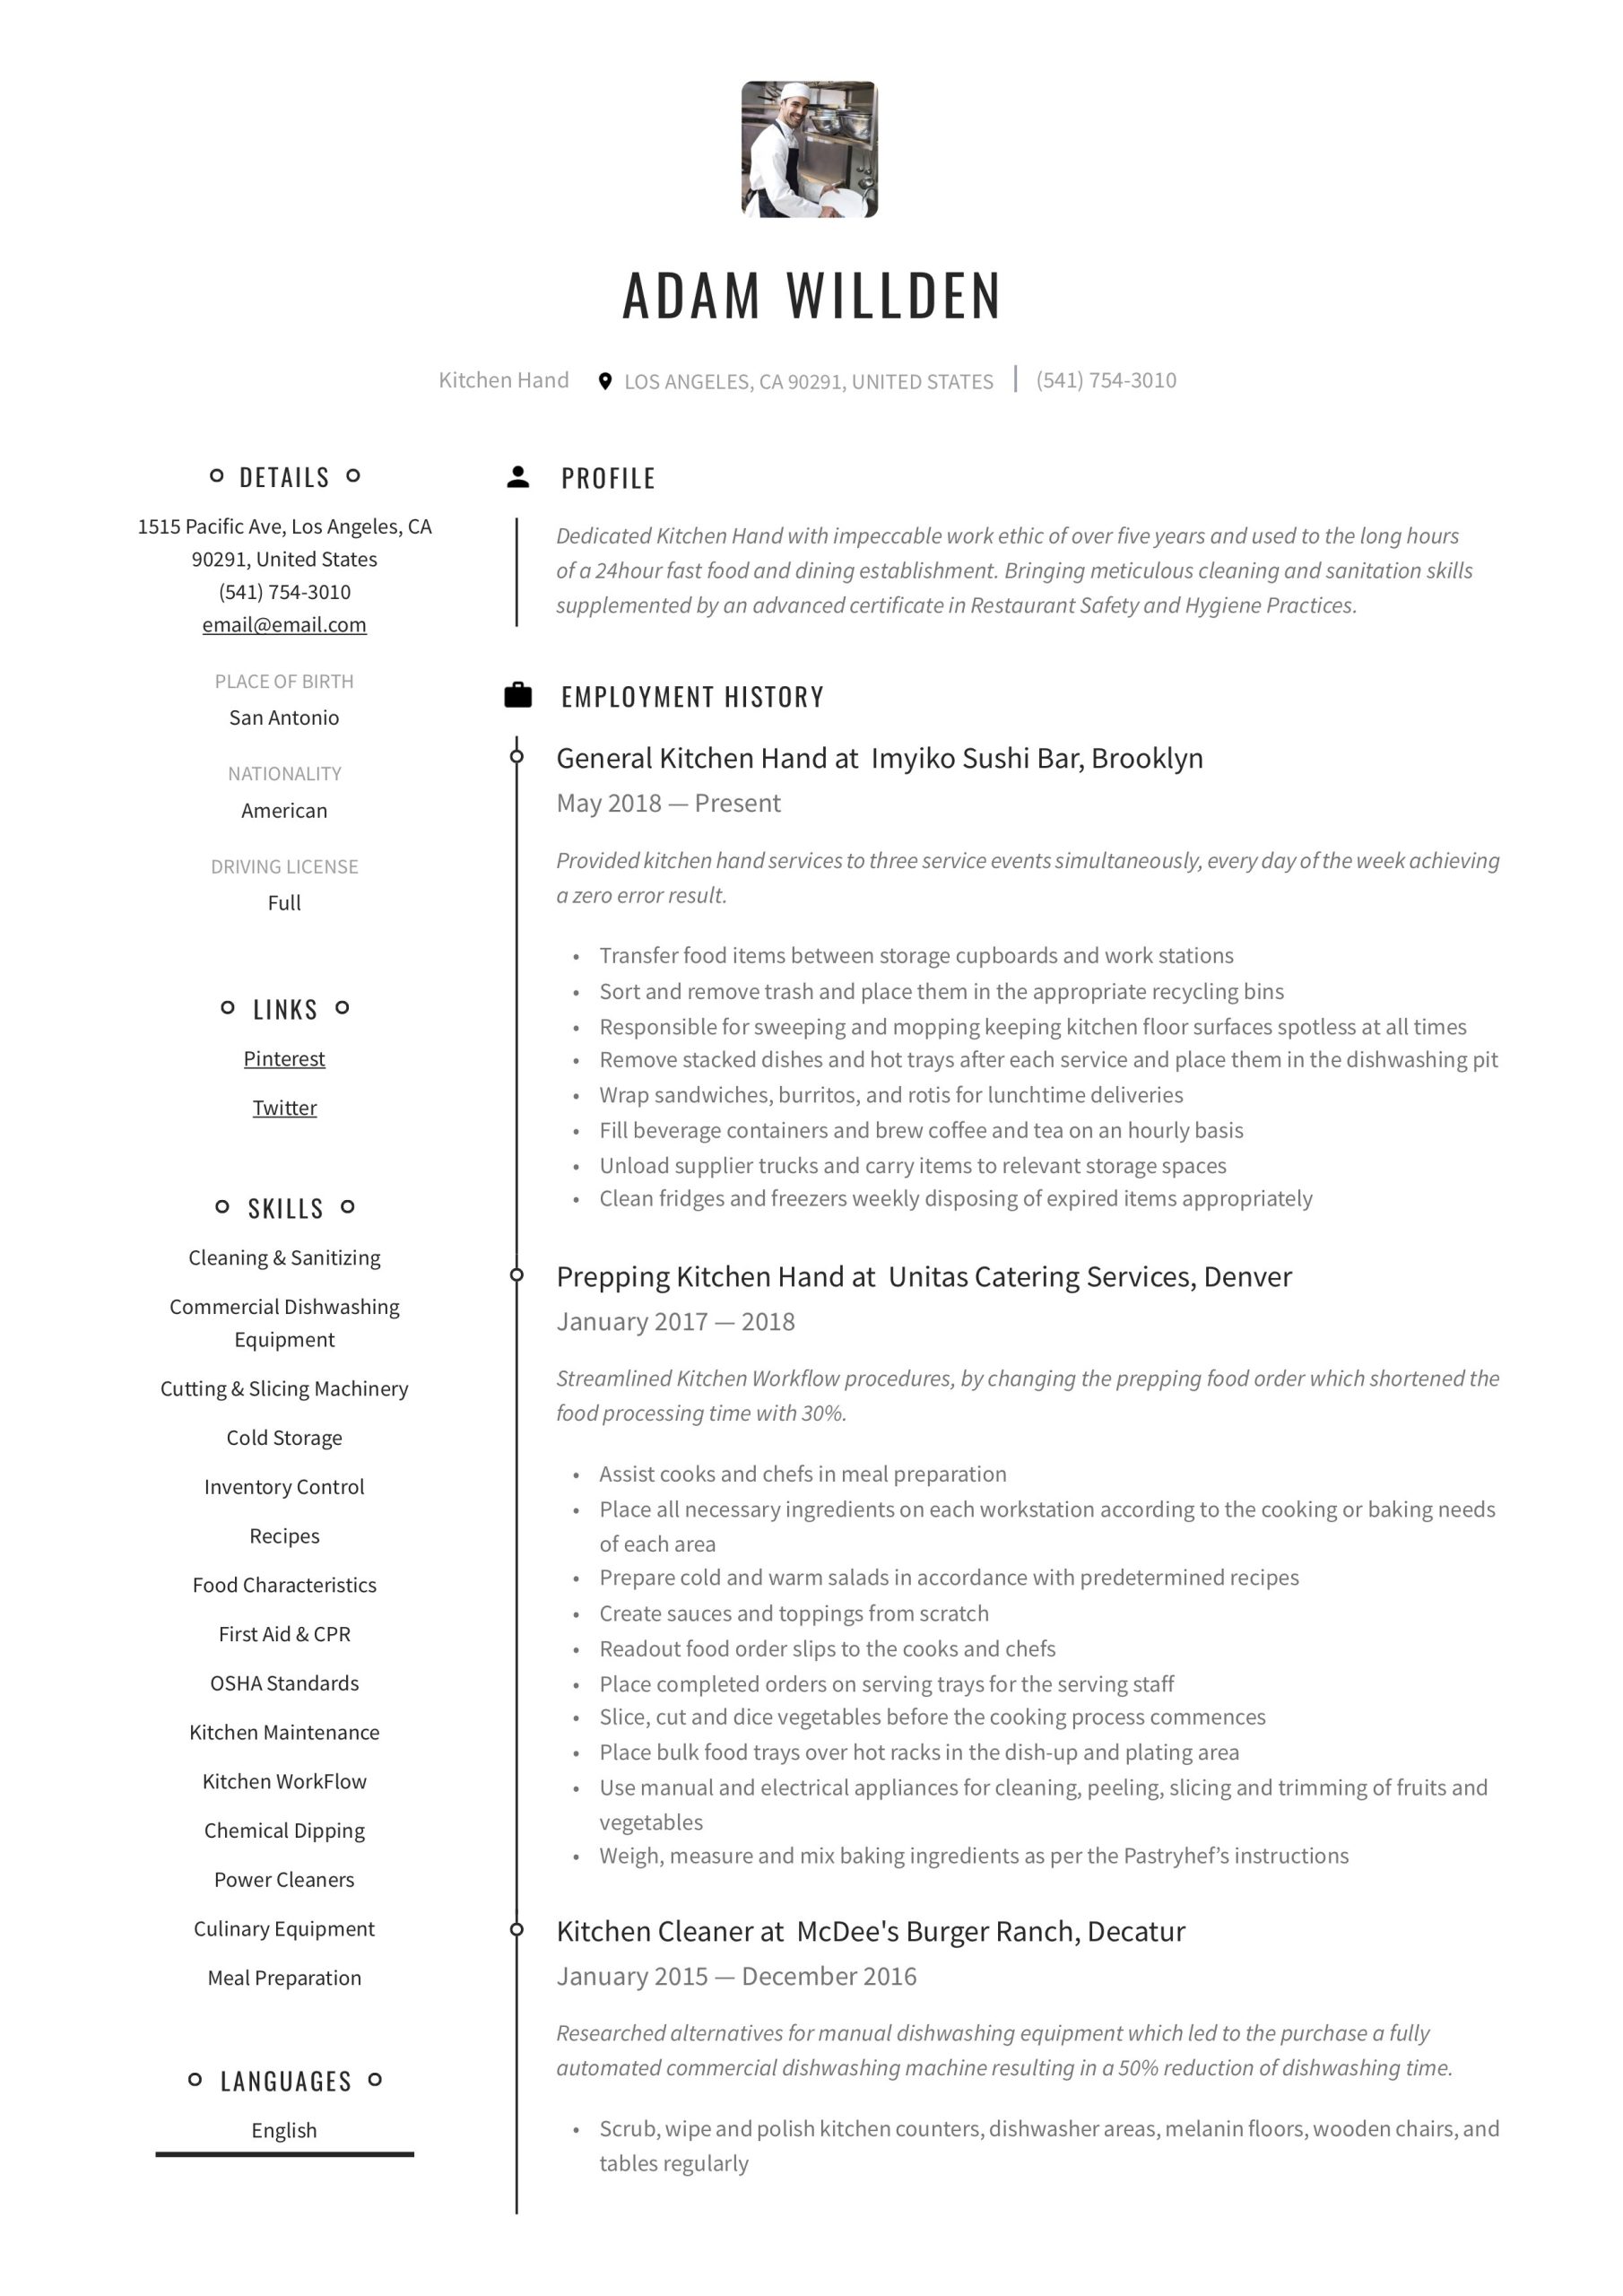 Sample Resume for Kitchen Staff without Experience Kitchen Hand Resume & Writing Guide  12 Free Templates 2020